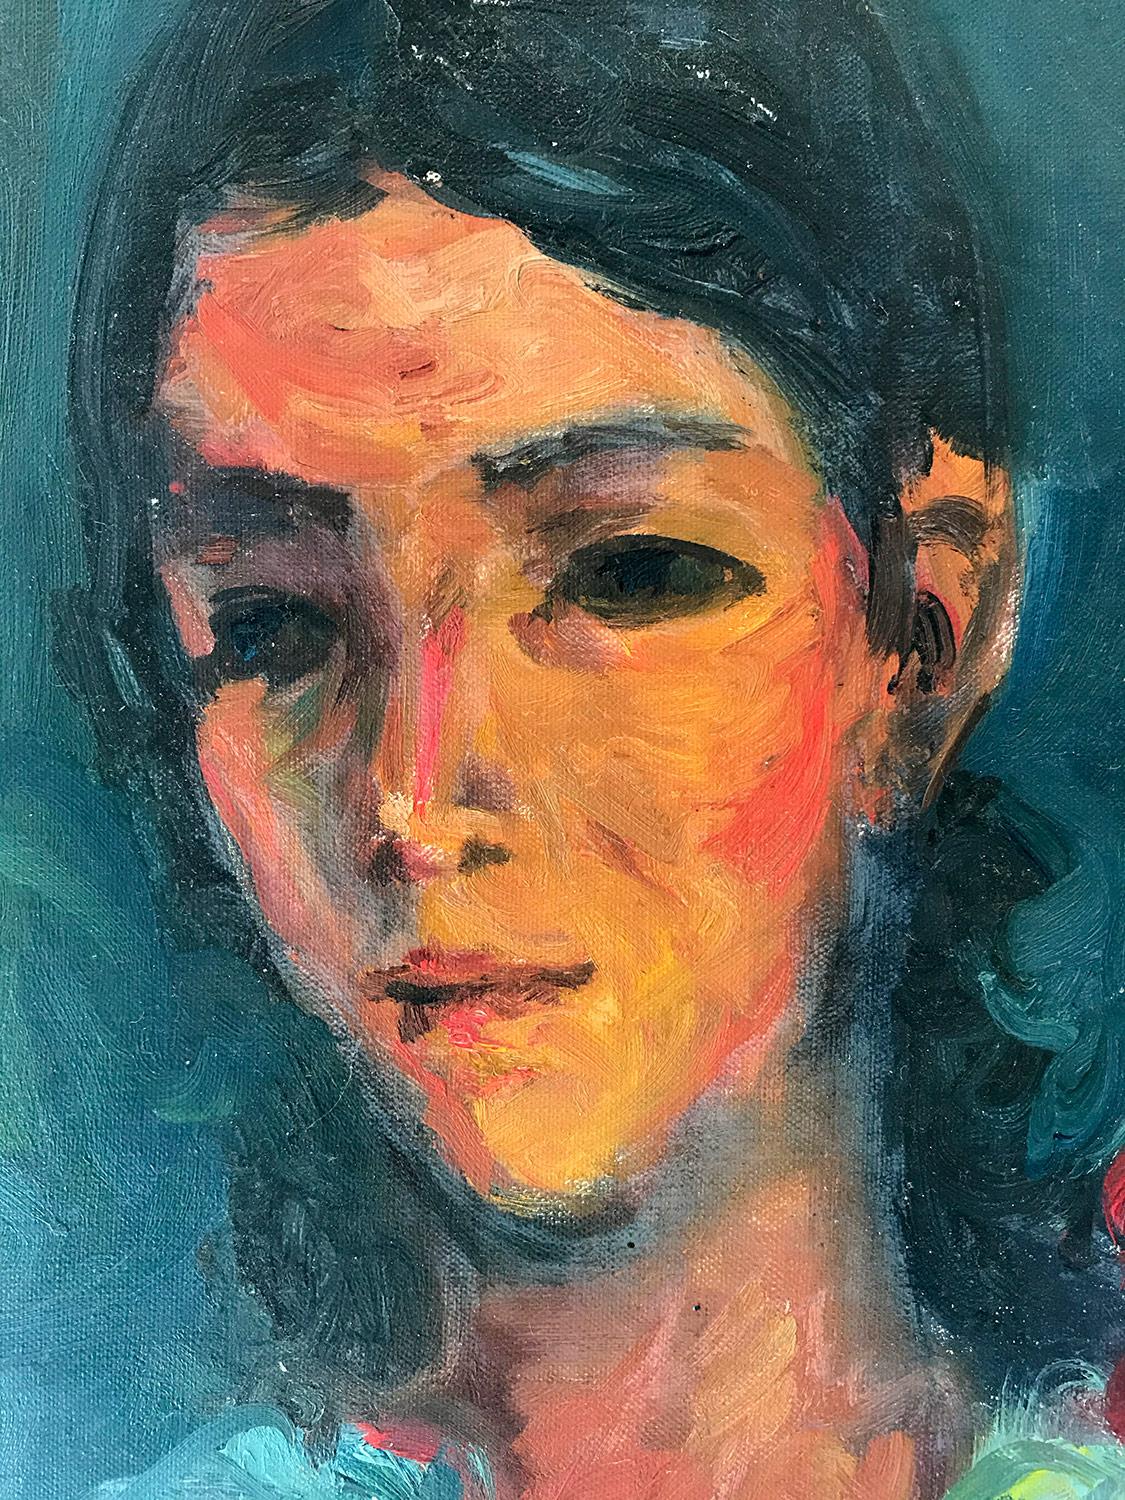 This painting depicts a whimsical portrait of a young girl with dark hair against an ultramarine blue background. The bright colors and quick brush strokes are what makes this painting so attractive and desirable. The piece is done in a highly